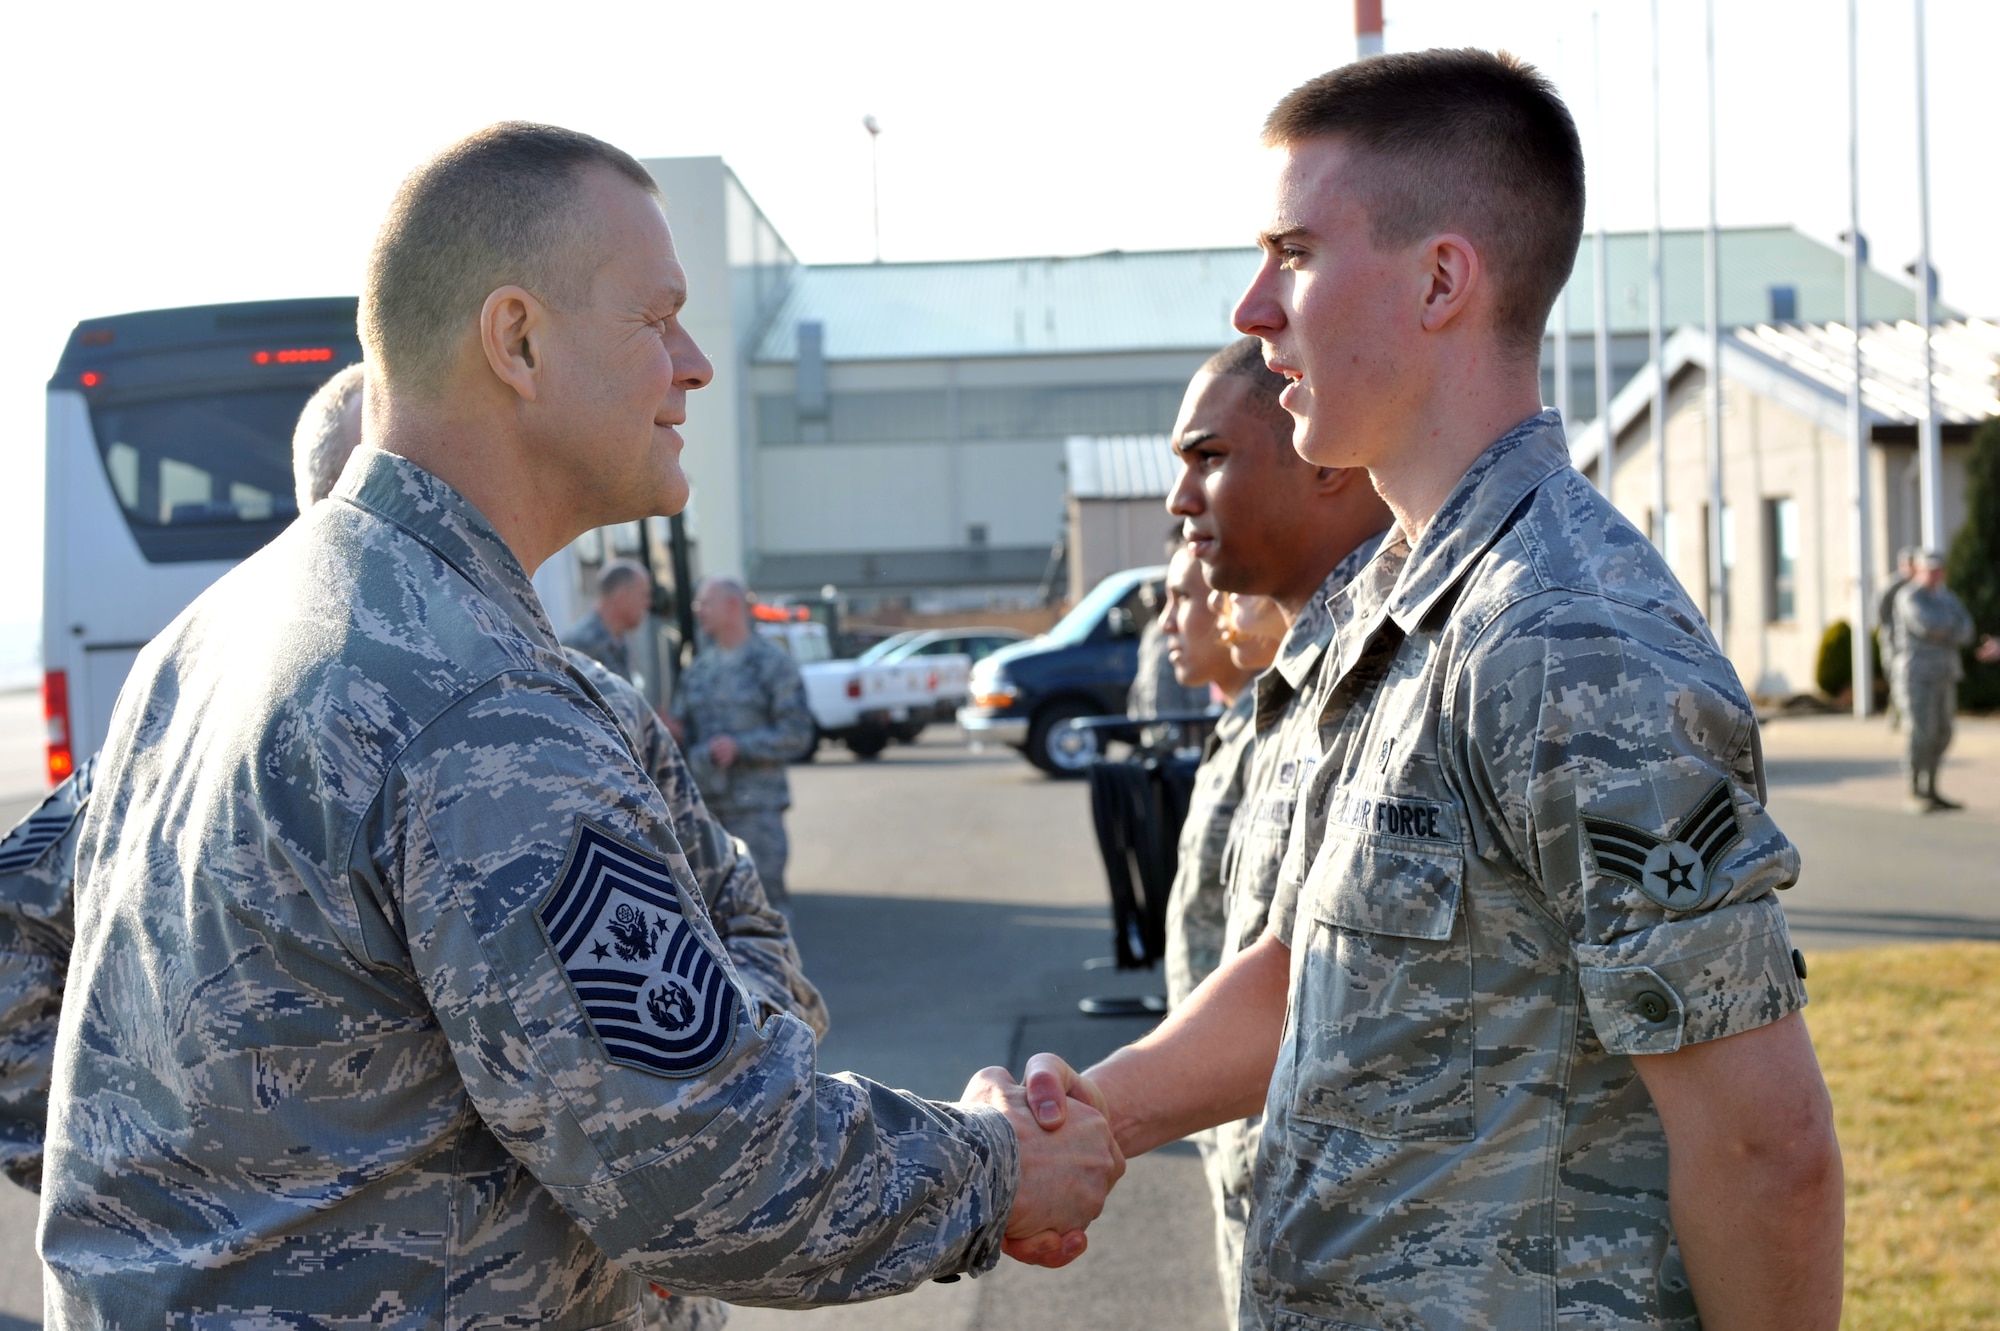 Chief Master Sgt. of the Air Force James Roy meets with Airmen from the 86 Airlift Wing at Ramstein Air Base, Germany, March 14, 2012. Chief Master Sgt. of the Air Force Roy visited several units at Ramstein and Landstuhl. (U.S. Air Force photo/Airman 1st Class Caitlin O'Neil-McKeown) 